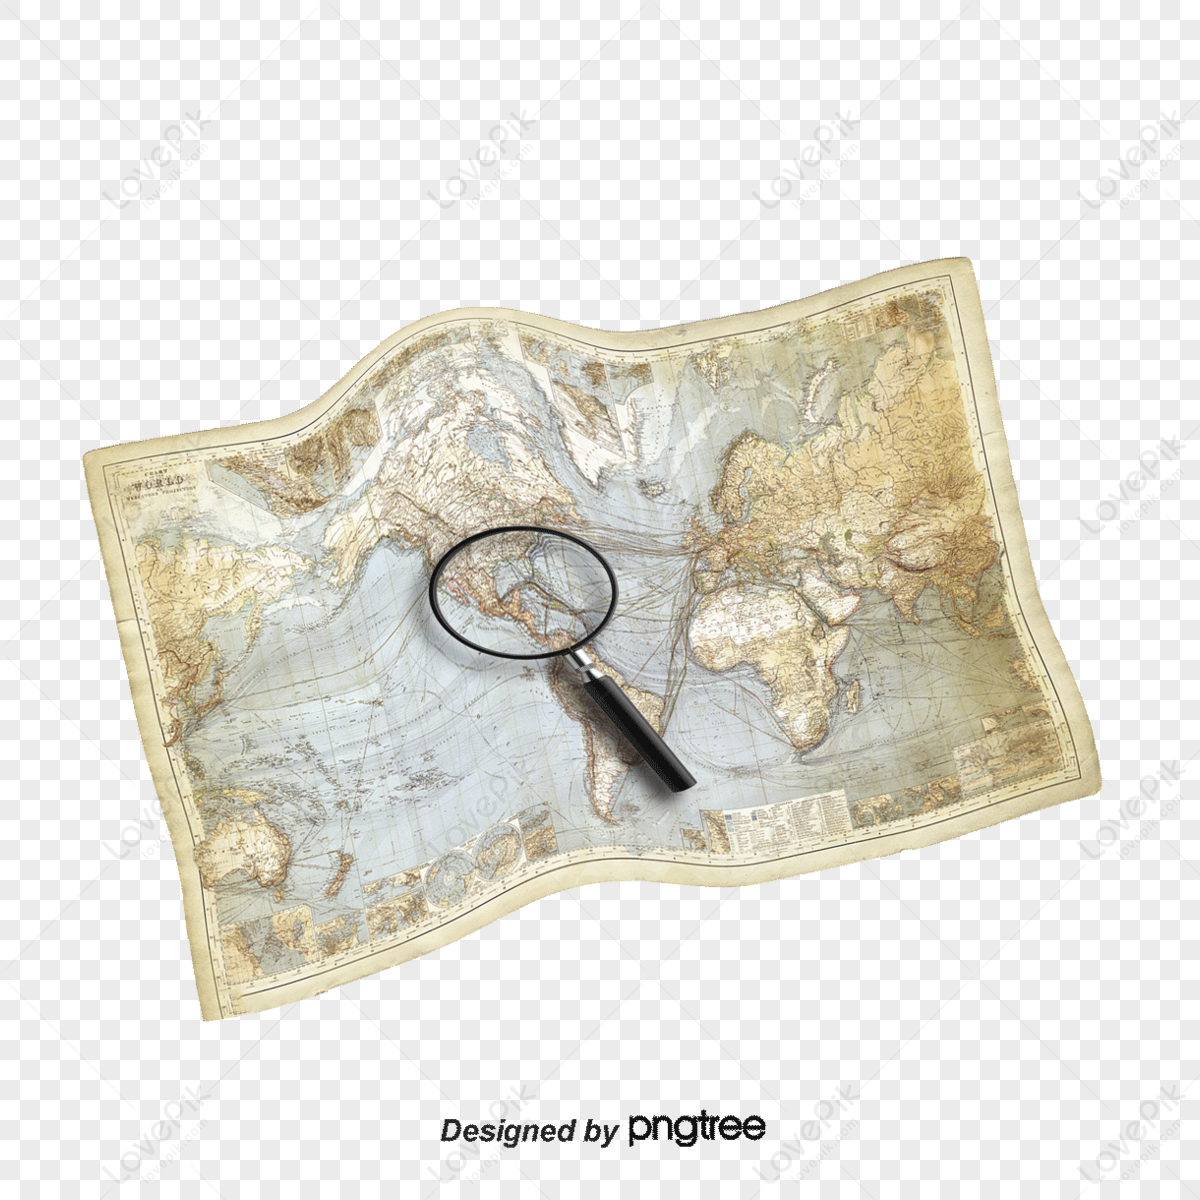 free to pull the material to do the old map,destination,america png hd transparent image